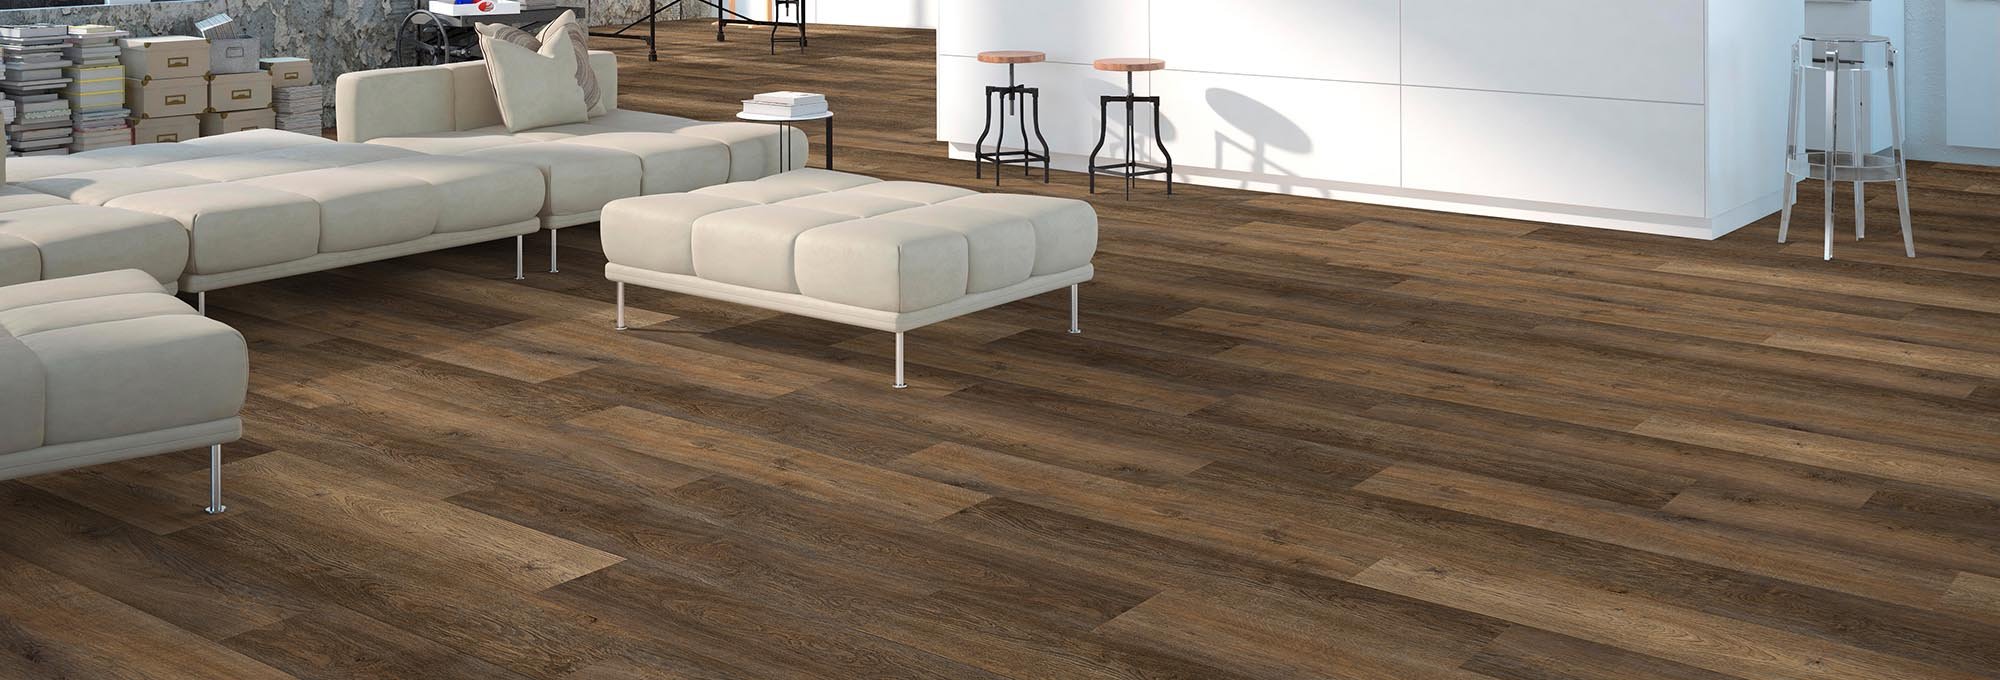 Shop Flooring Products from Design Network COLORTILE in Wichita,  KS